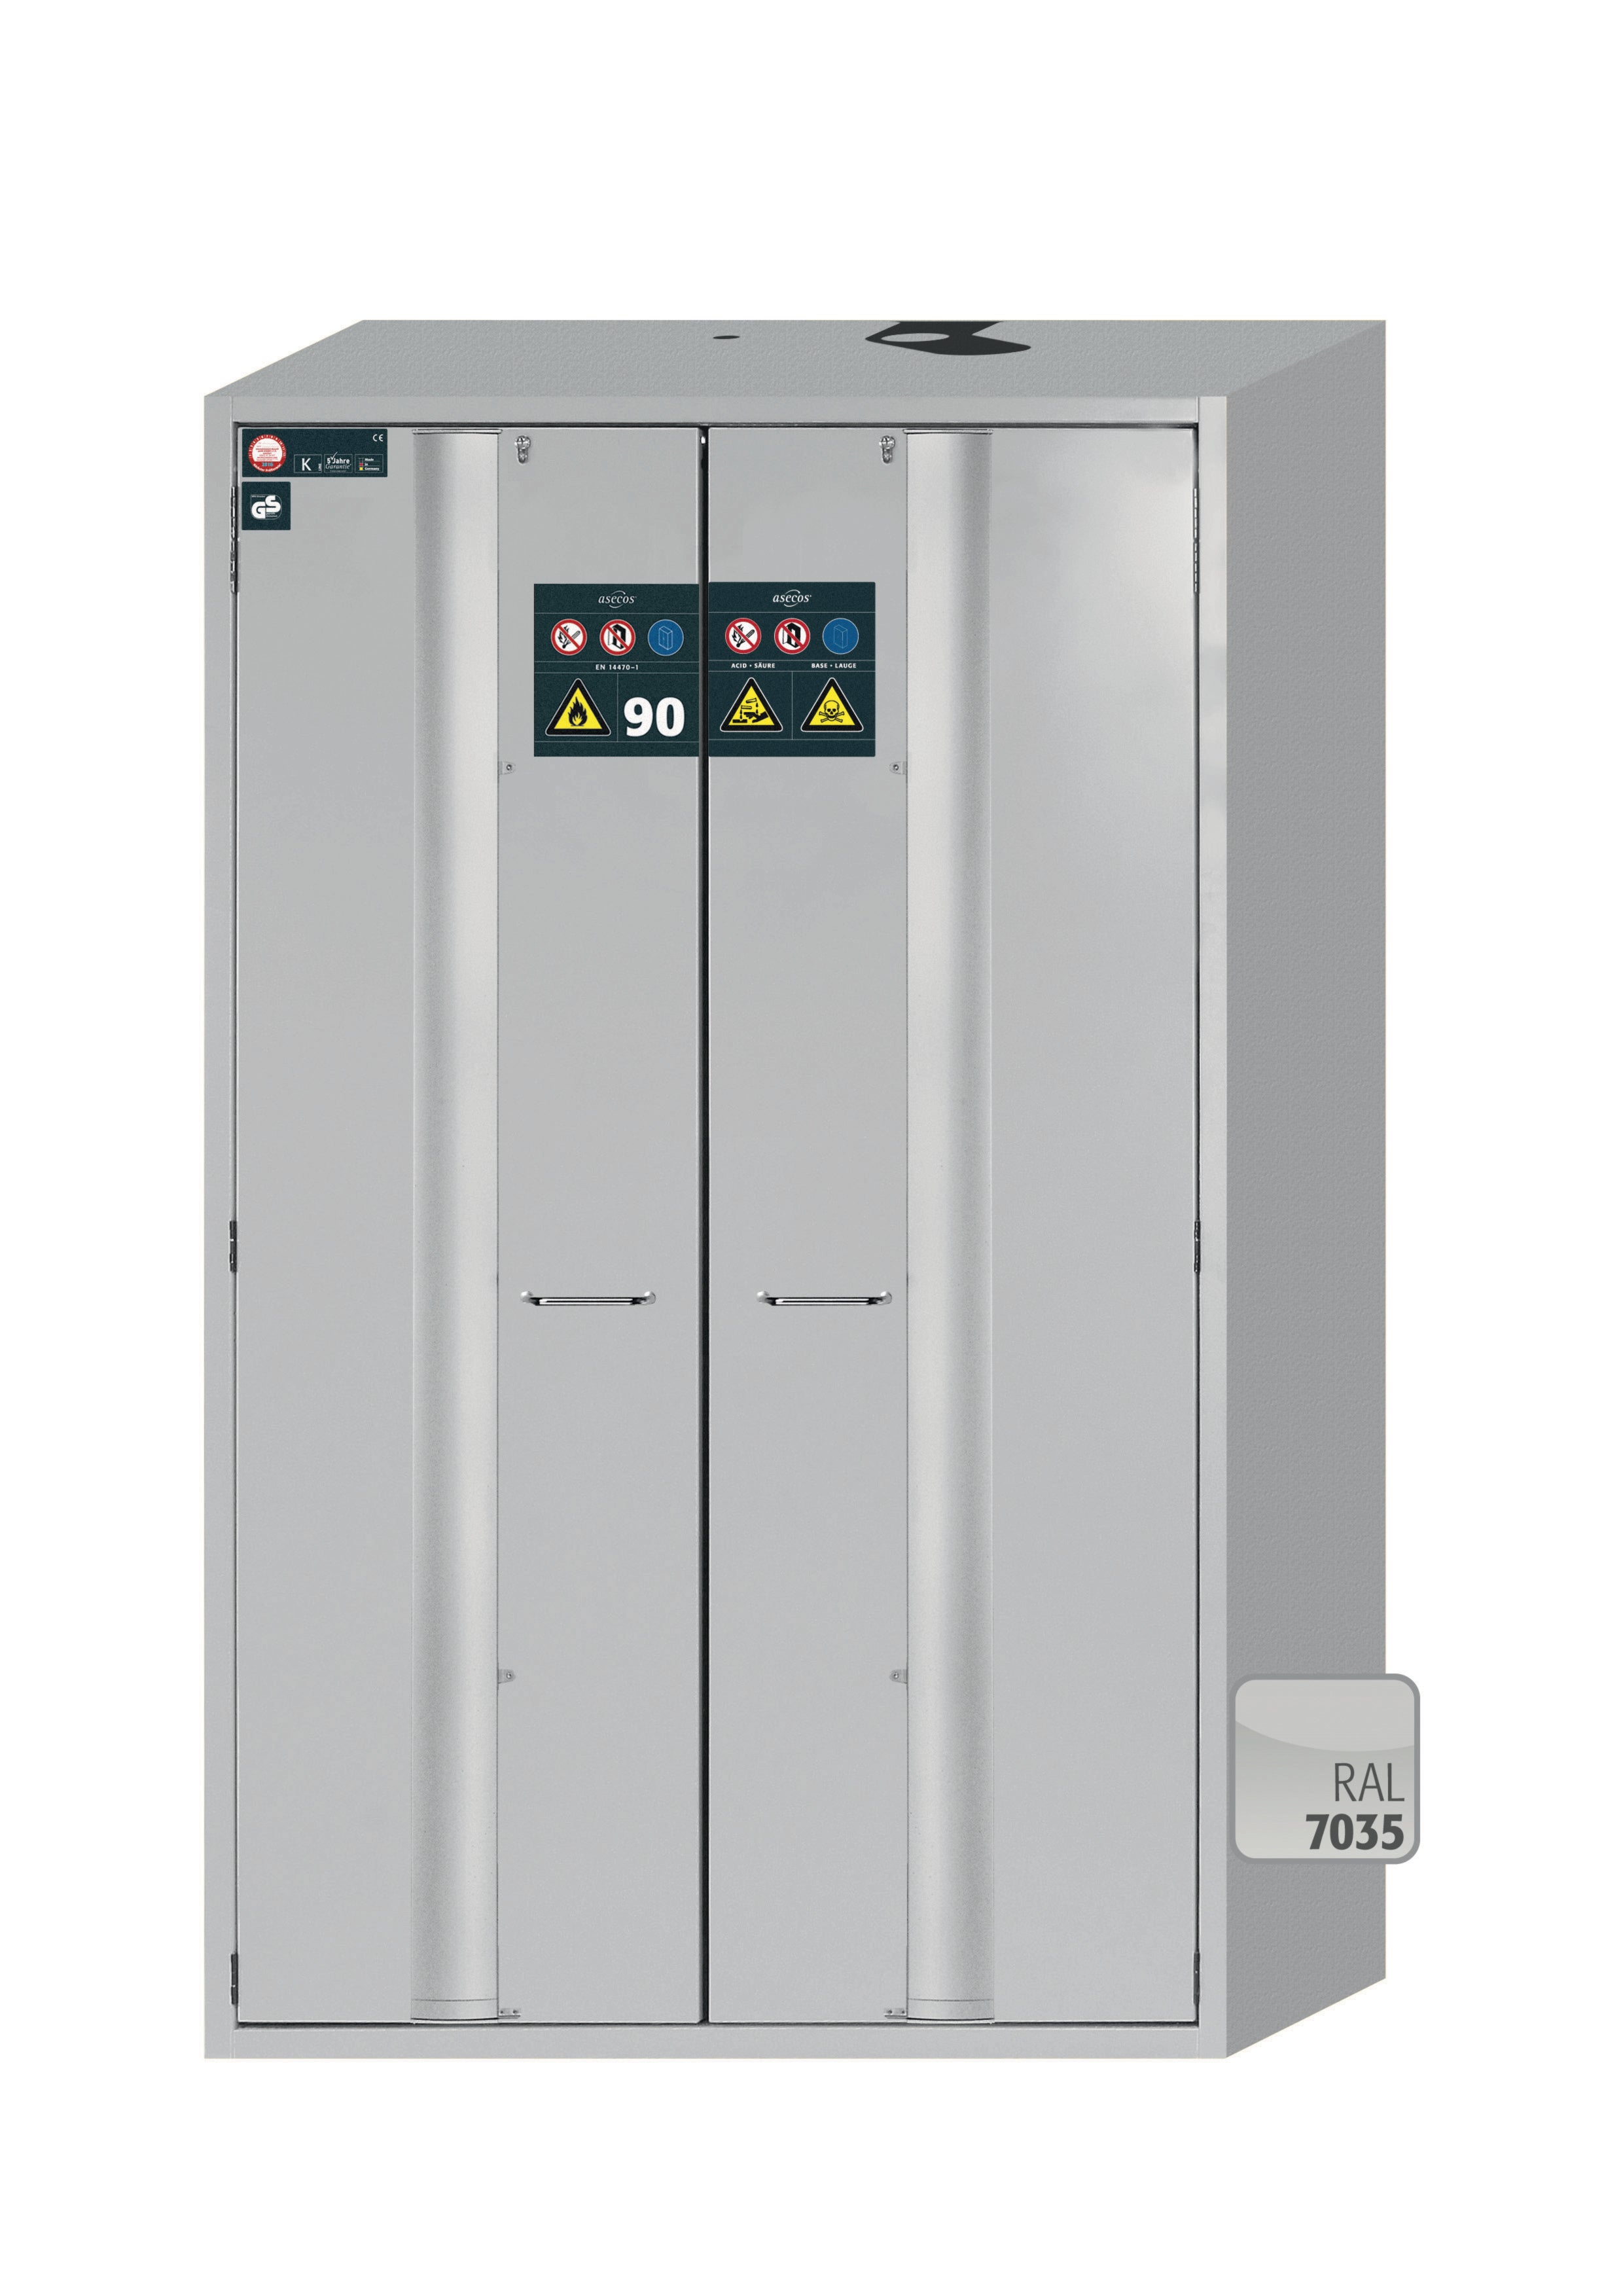 Type 90 safety cabinet S-PHOENIX-90 model S90.196.120.MV.FDAS in light gray RAL 7035 with 4x standard pull-out tray (sheet steel)